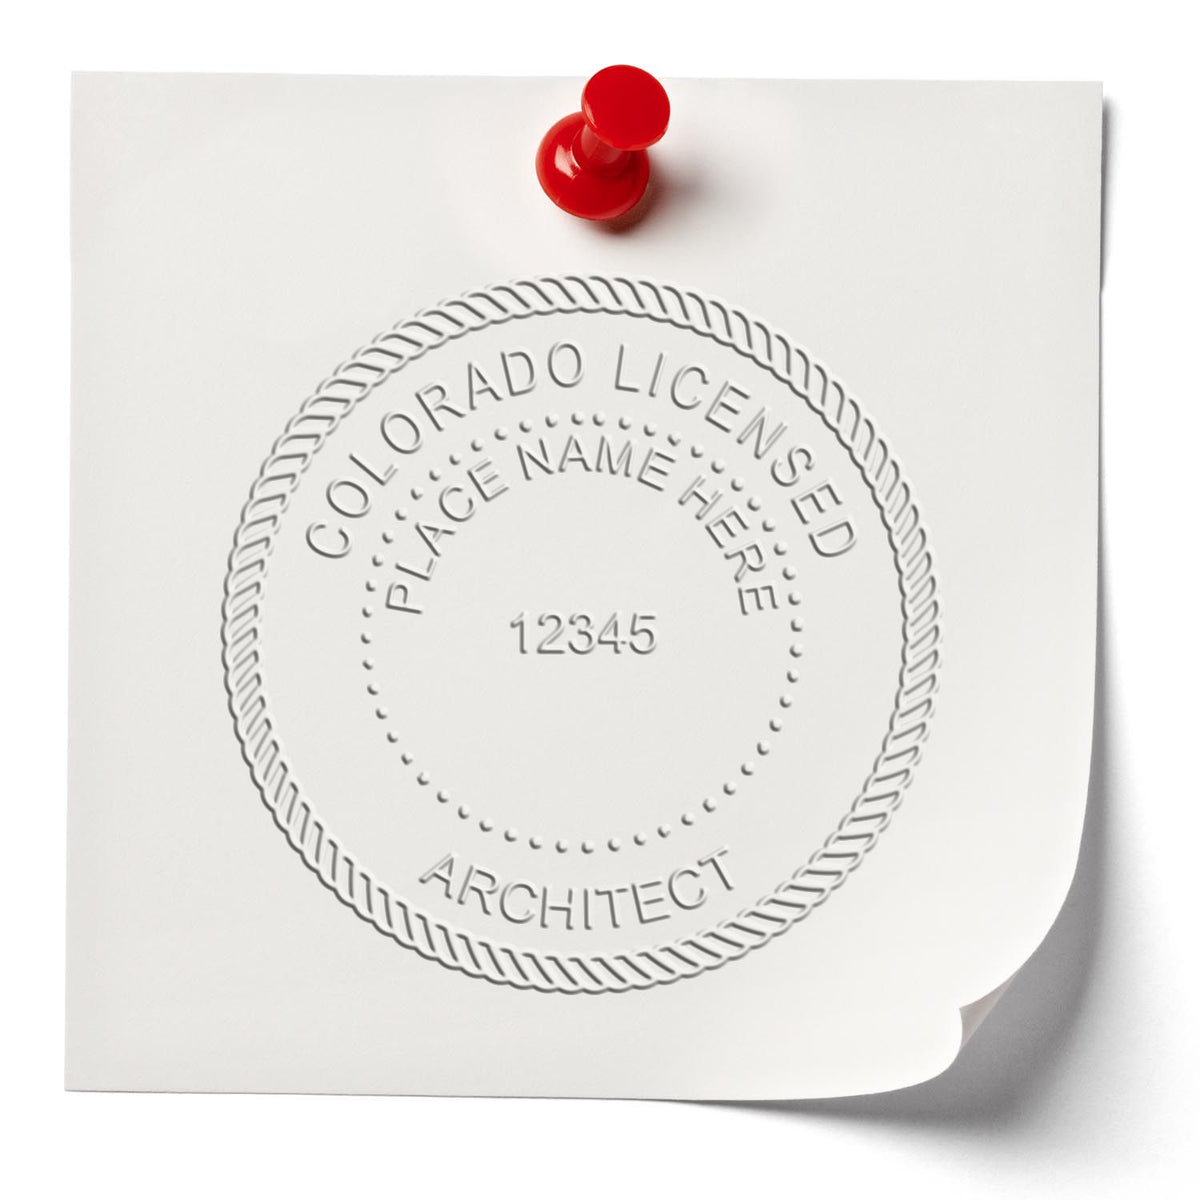 An in use photo of the Hybrid Colorado Architect Seal showing a sample imprint on a cardstock